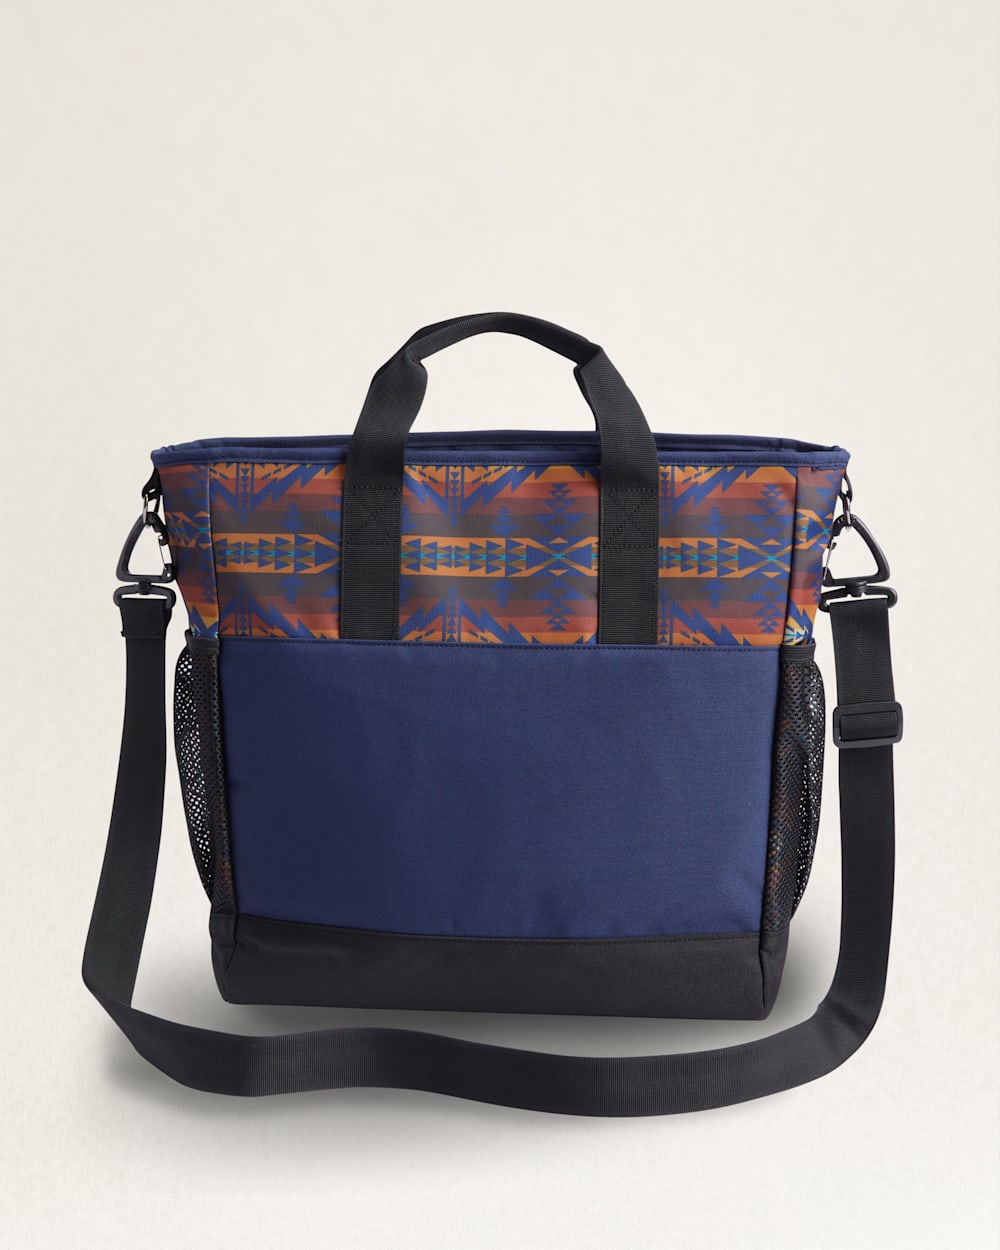 ALTERNATE VIEW OF TRAPPER PEAK CARRYALL TOTE IN NAVY image number 2